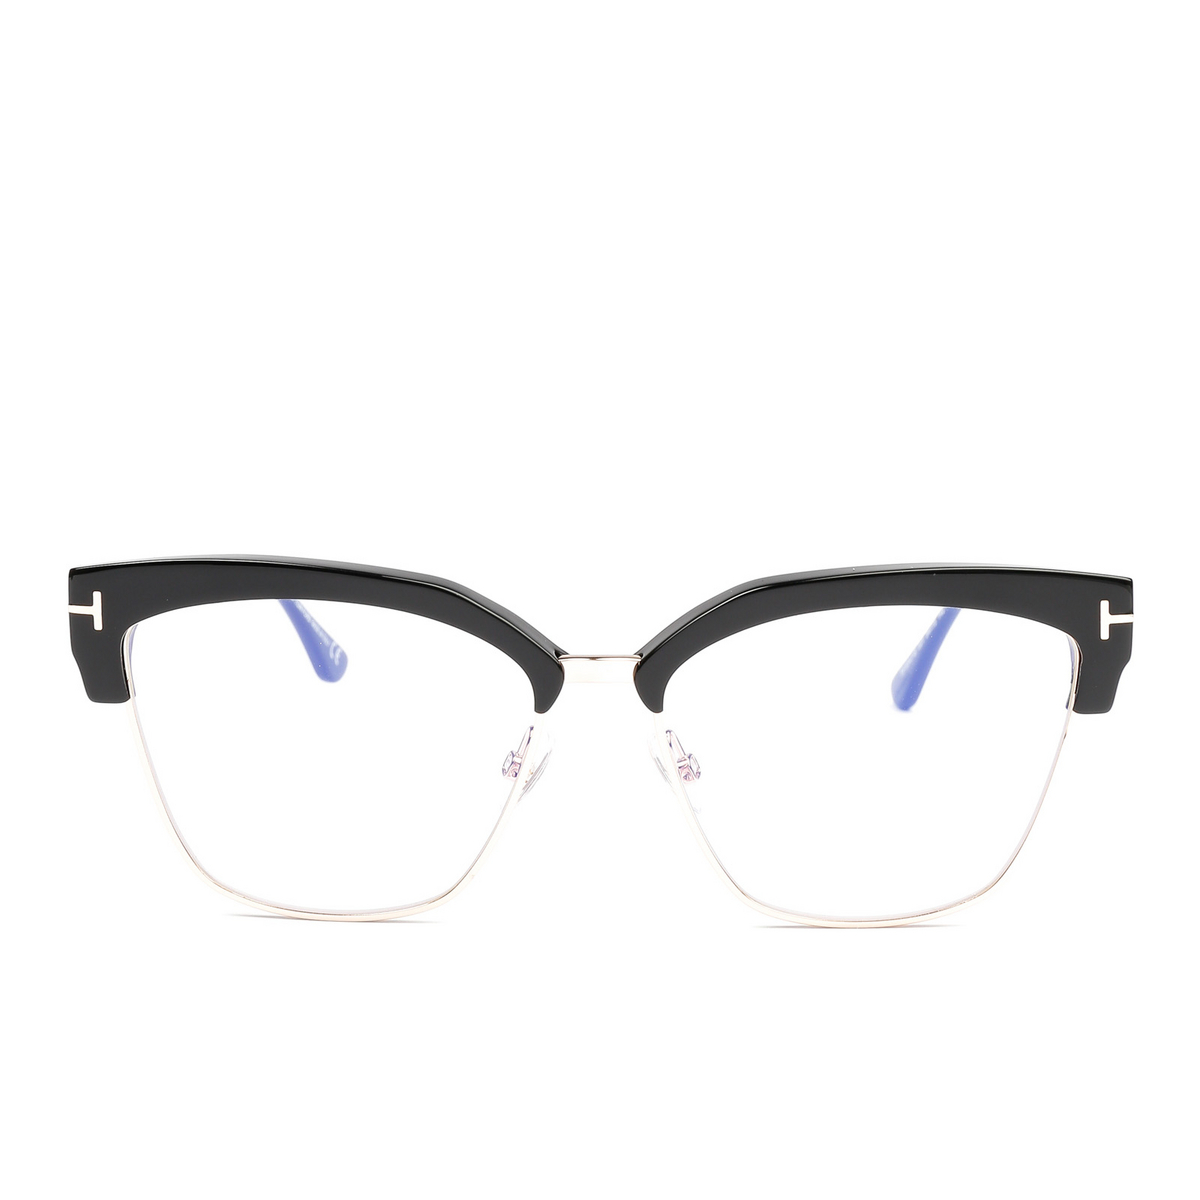 Tom Ford® Butterfly Eyeglasses: FT5547-B color Shiny Black 001 - front view.